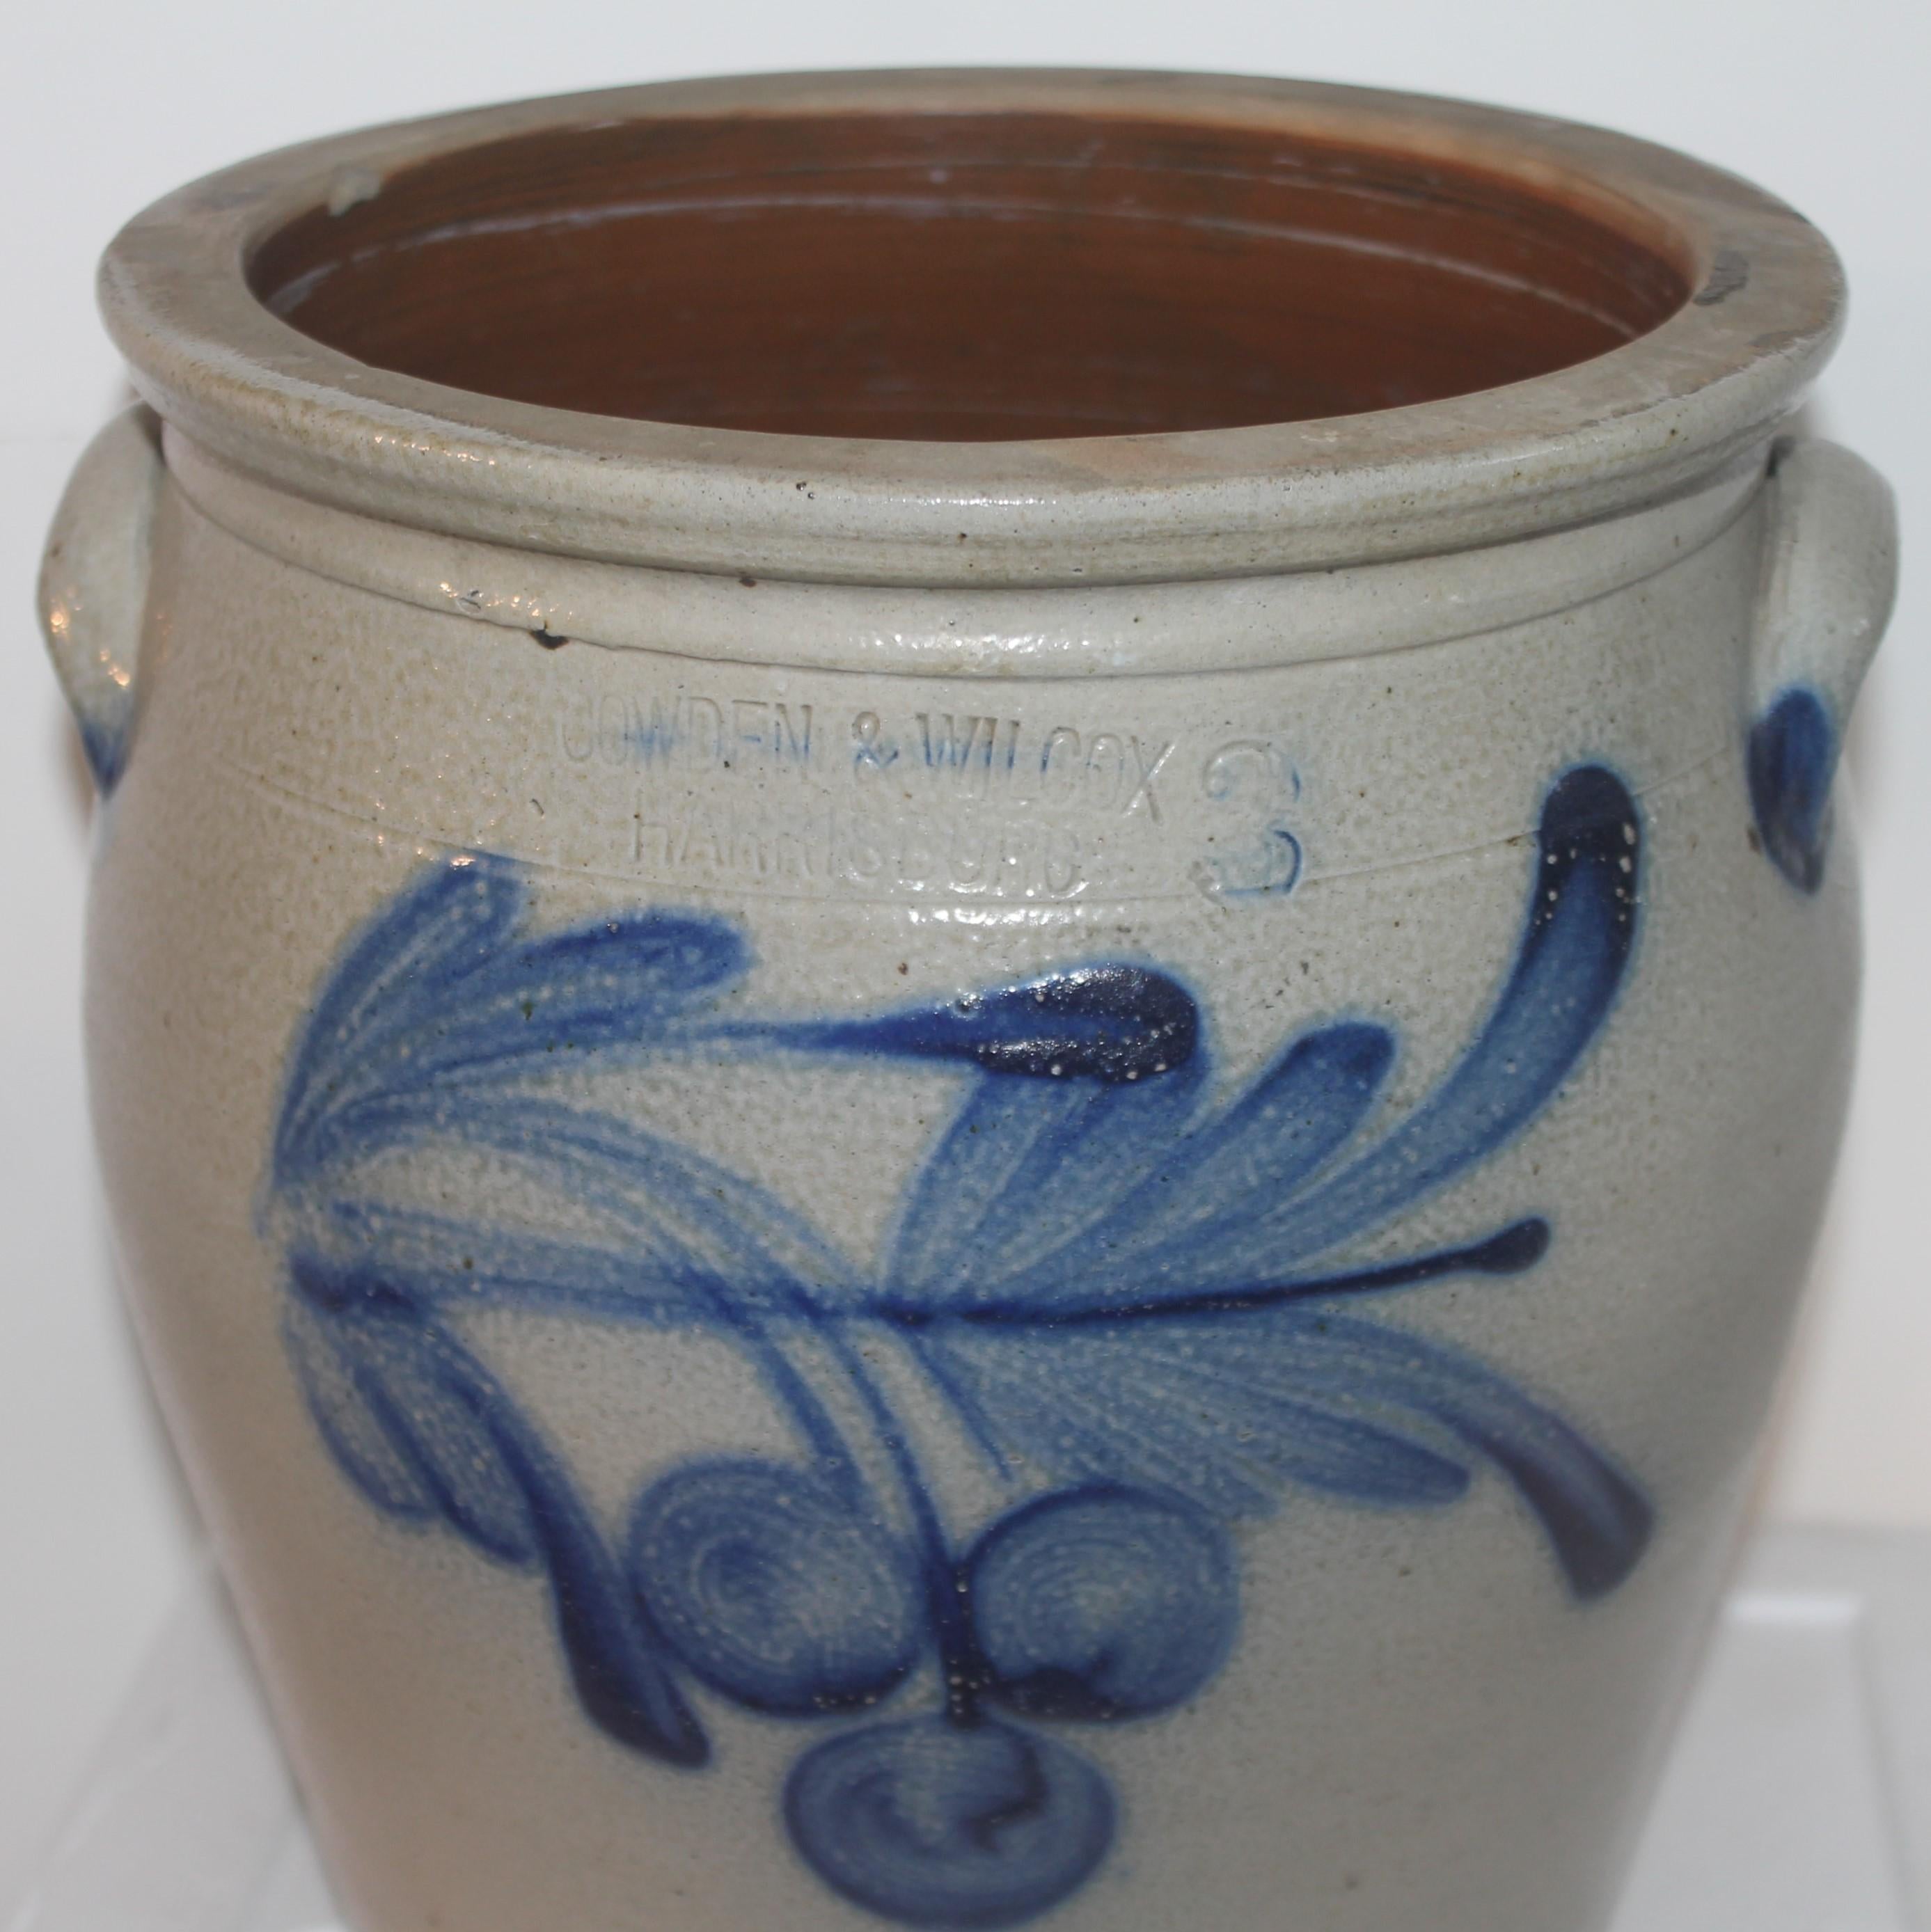 This three gallon stone ware crock with decorated cherries is from Harrisburg, Pennsylvania. The maker is Cowden & Wilcox and is signed on the front above the hand painted decoration. The crock is double handled and in mint condition.